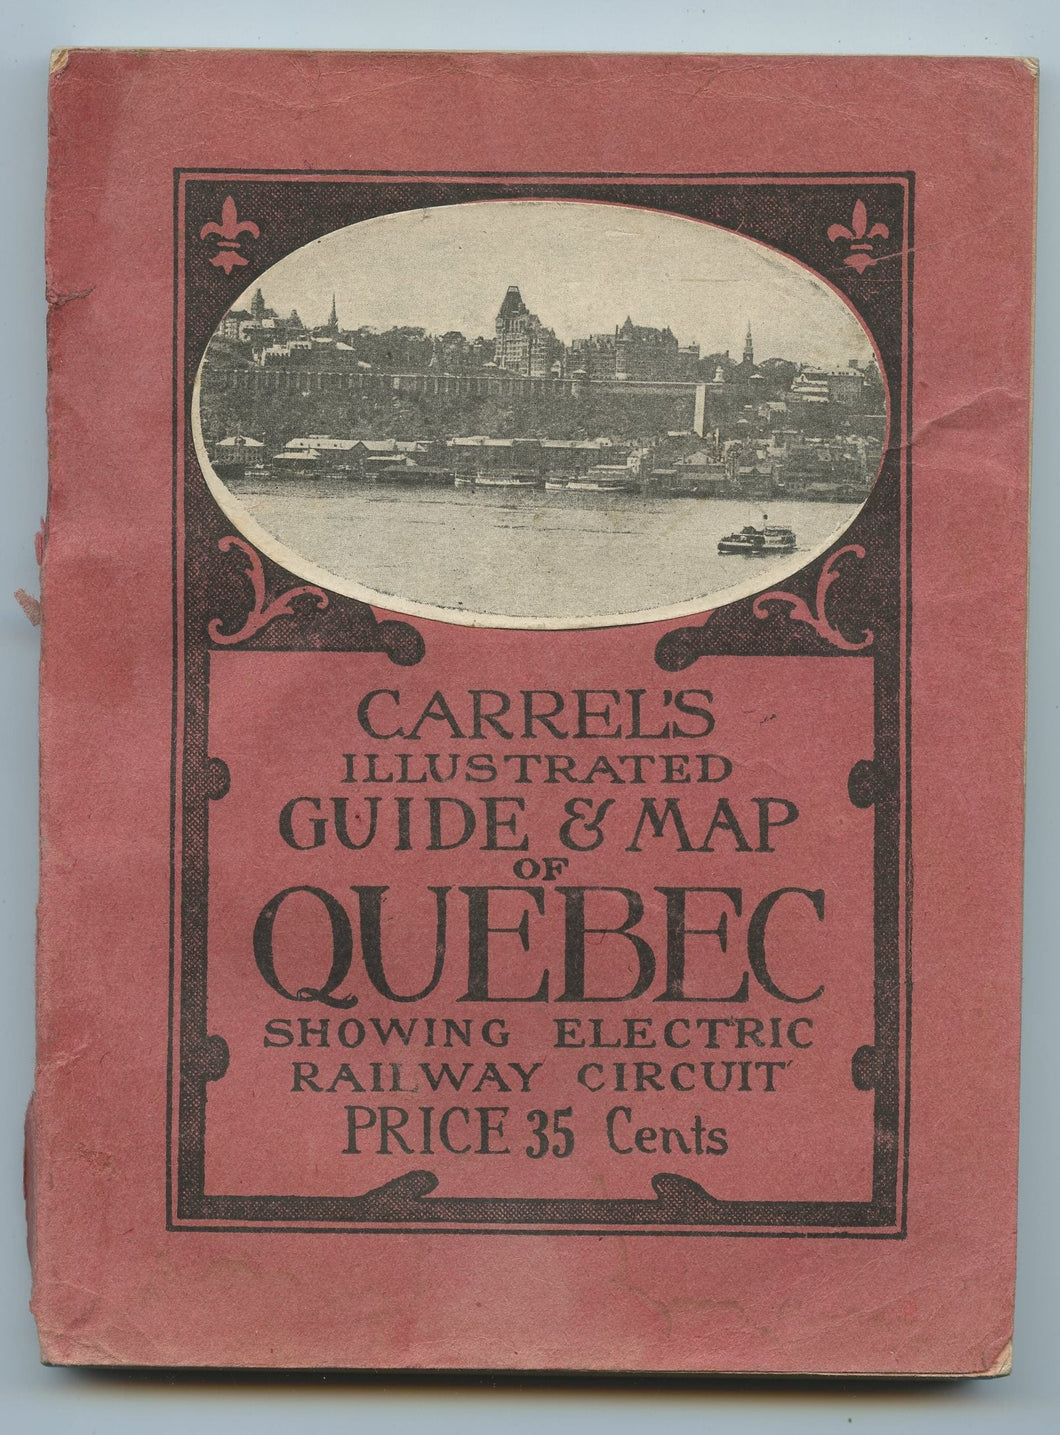 Carrel's Ilustrated Guide & Map of Quebec